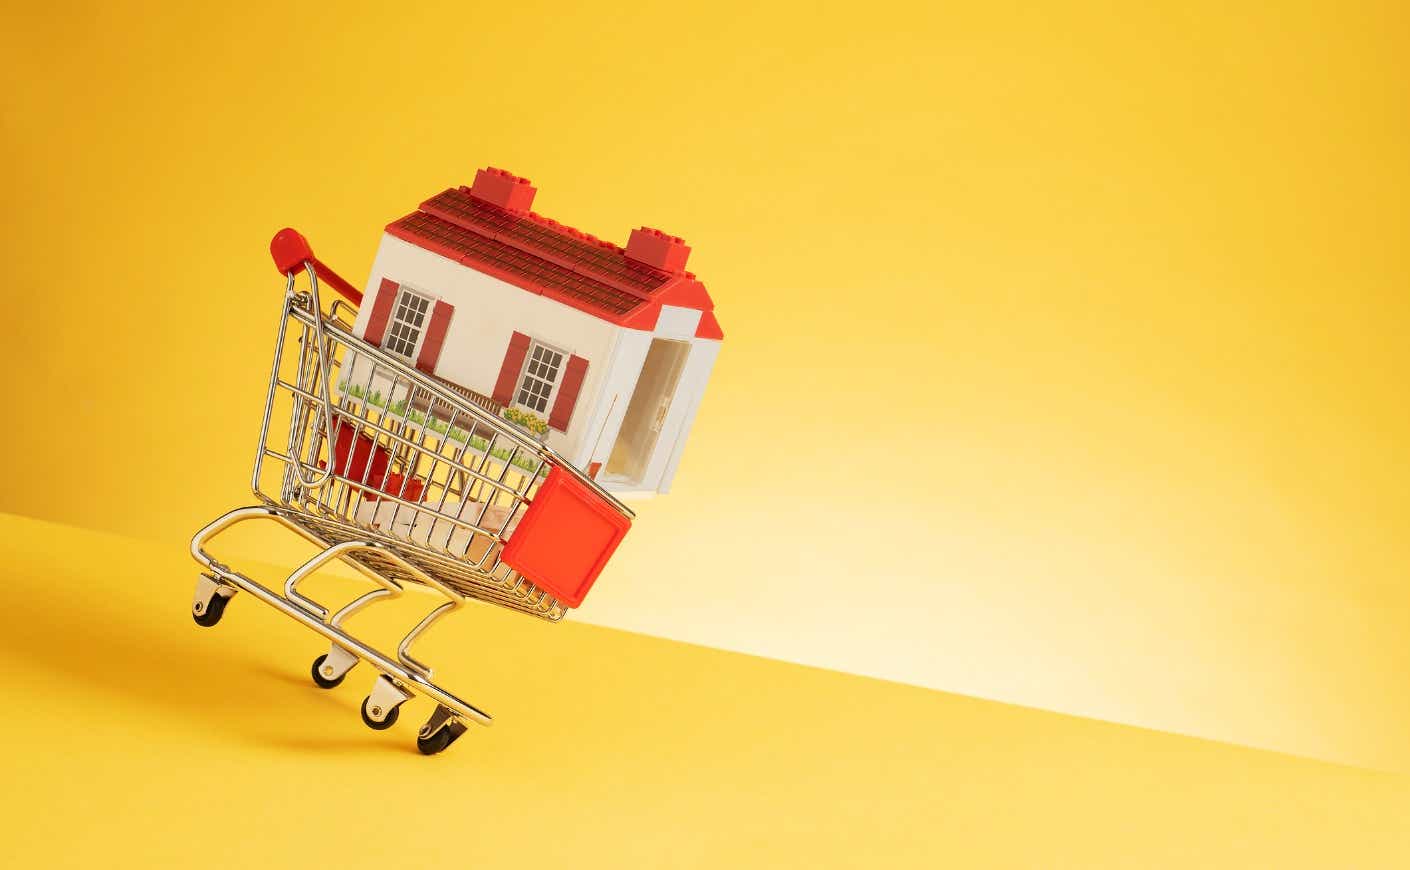 Illustration of a shopping cart with a house inside